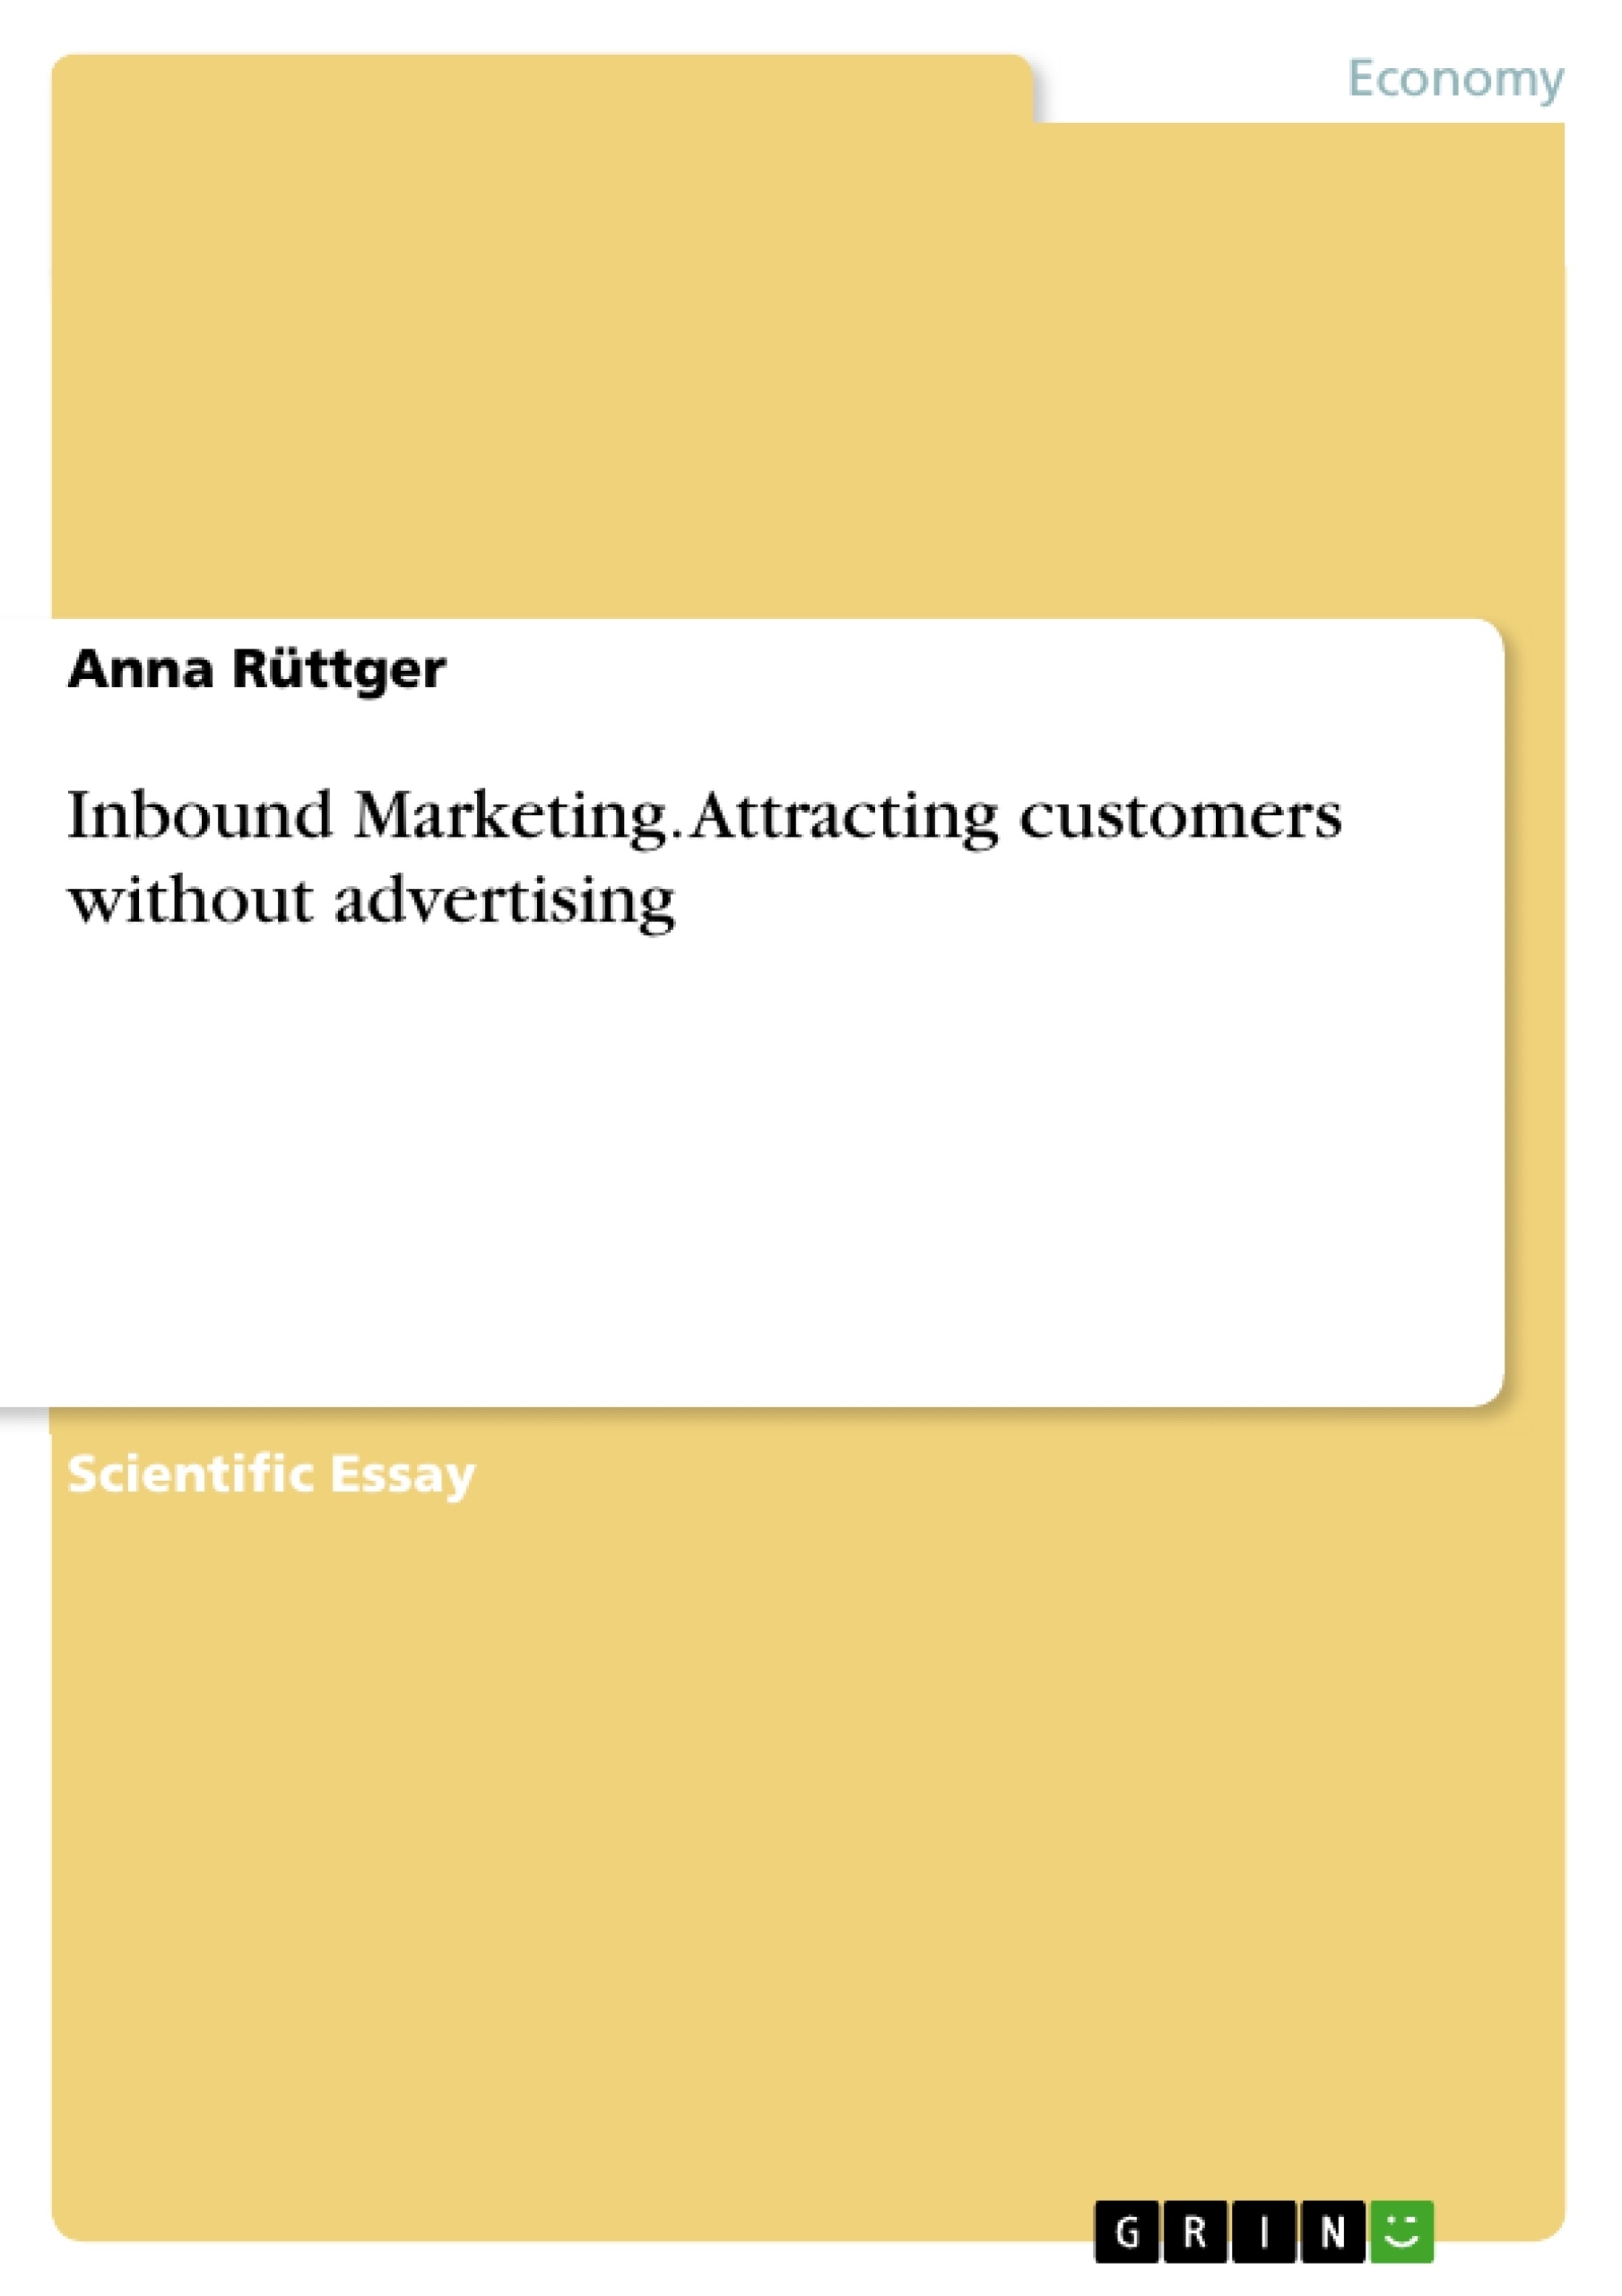 Title: Inbound Marketing. Attracting customers without advertising